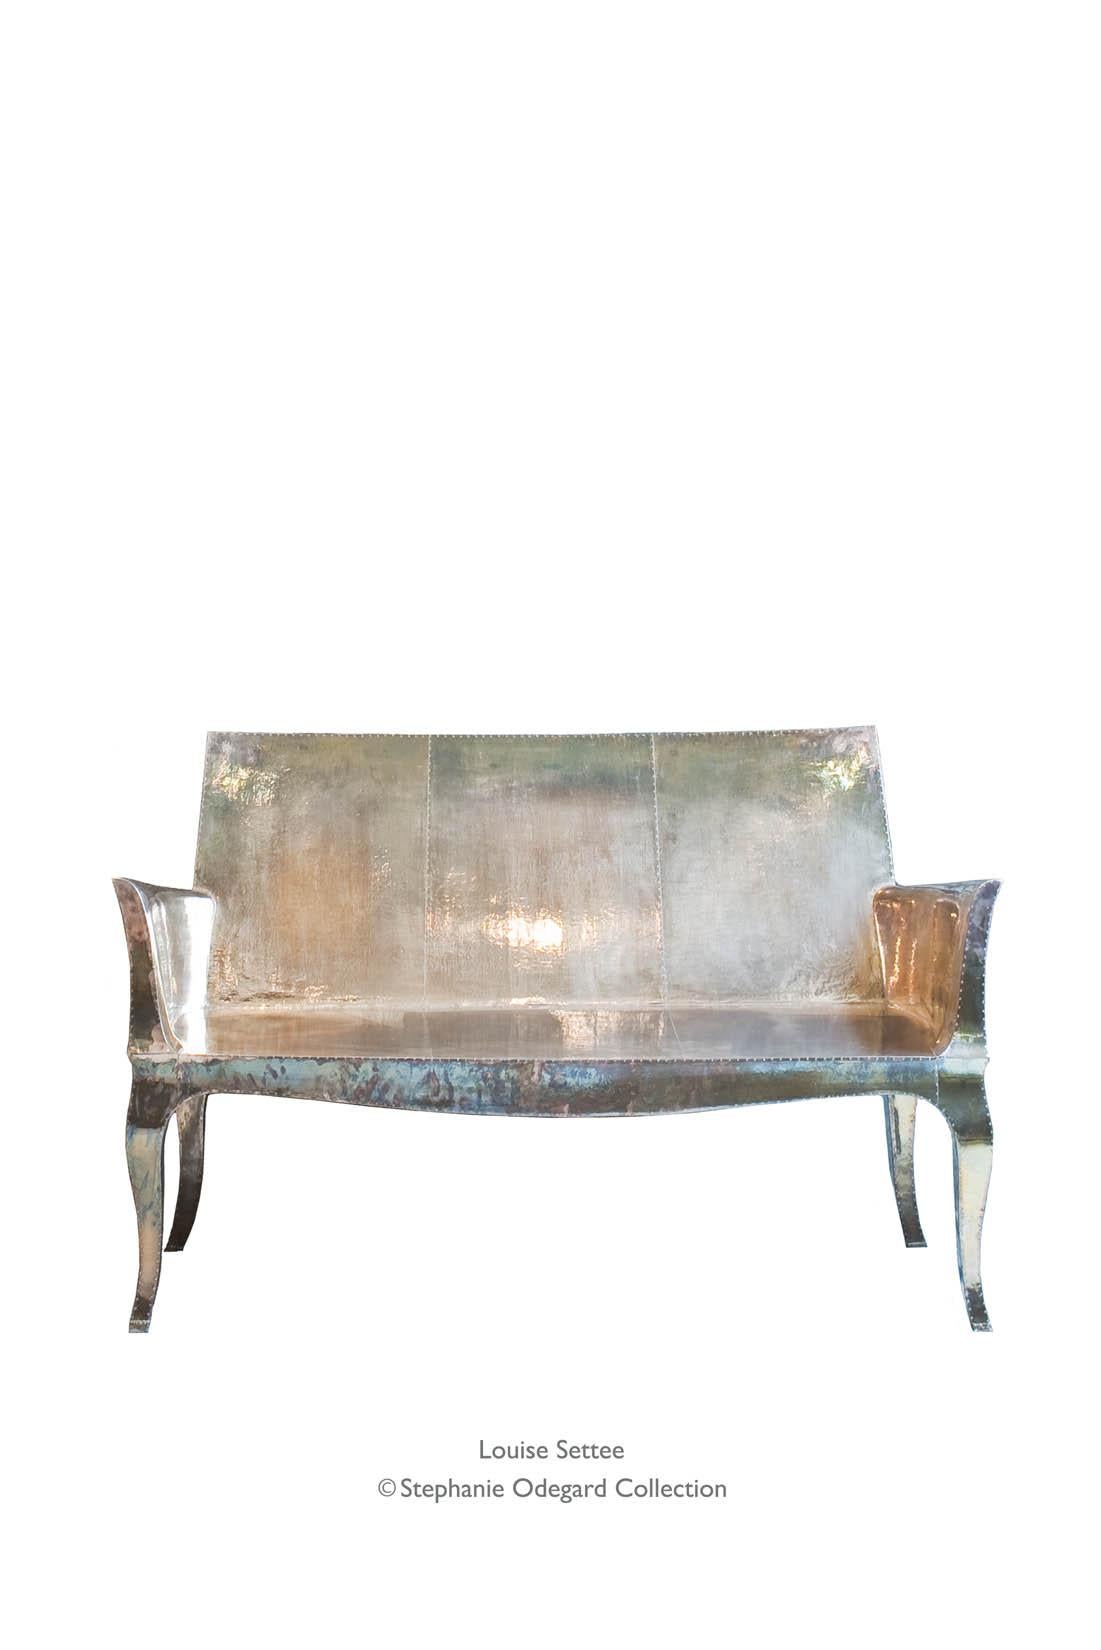 Louise Settee Art Deco Chaise Longues in Mid. Hammered Brass by Paul Mathieu For Sale 6